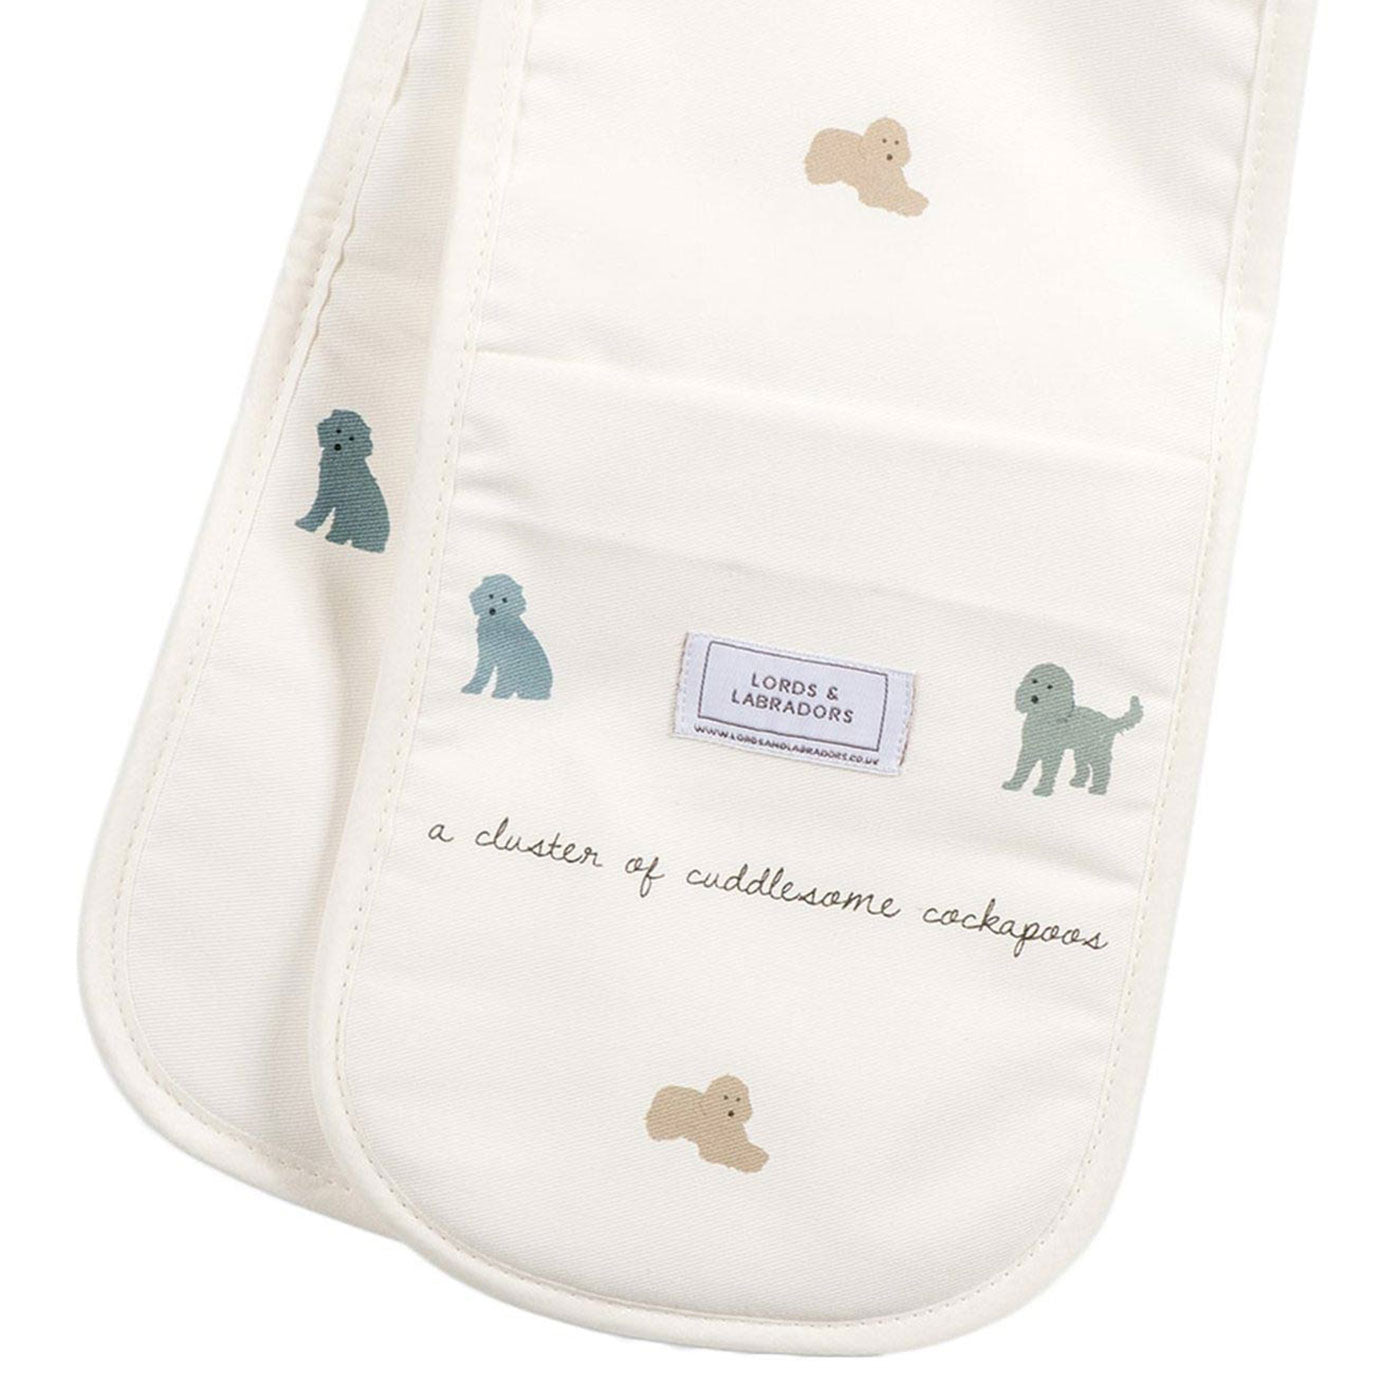 Cuddlesome Cockapoos Double Oven Glove